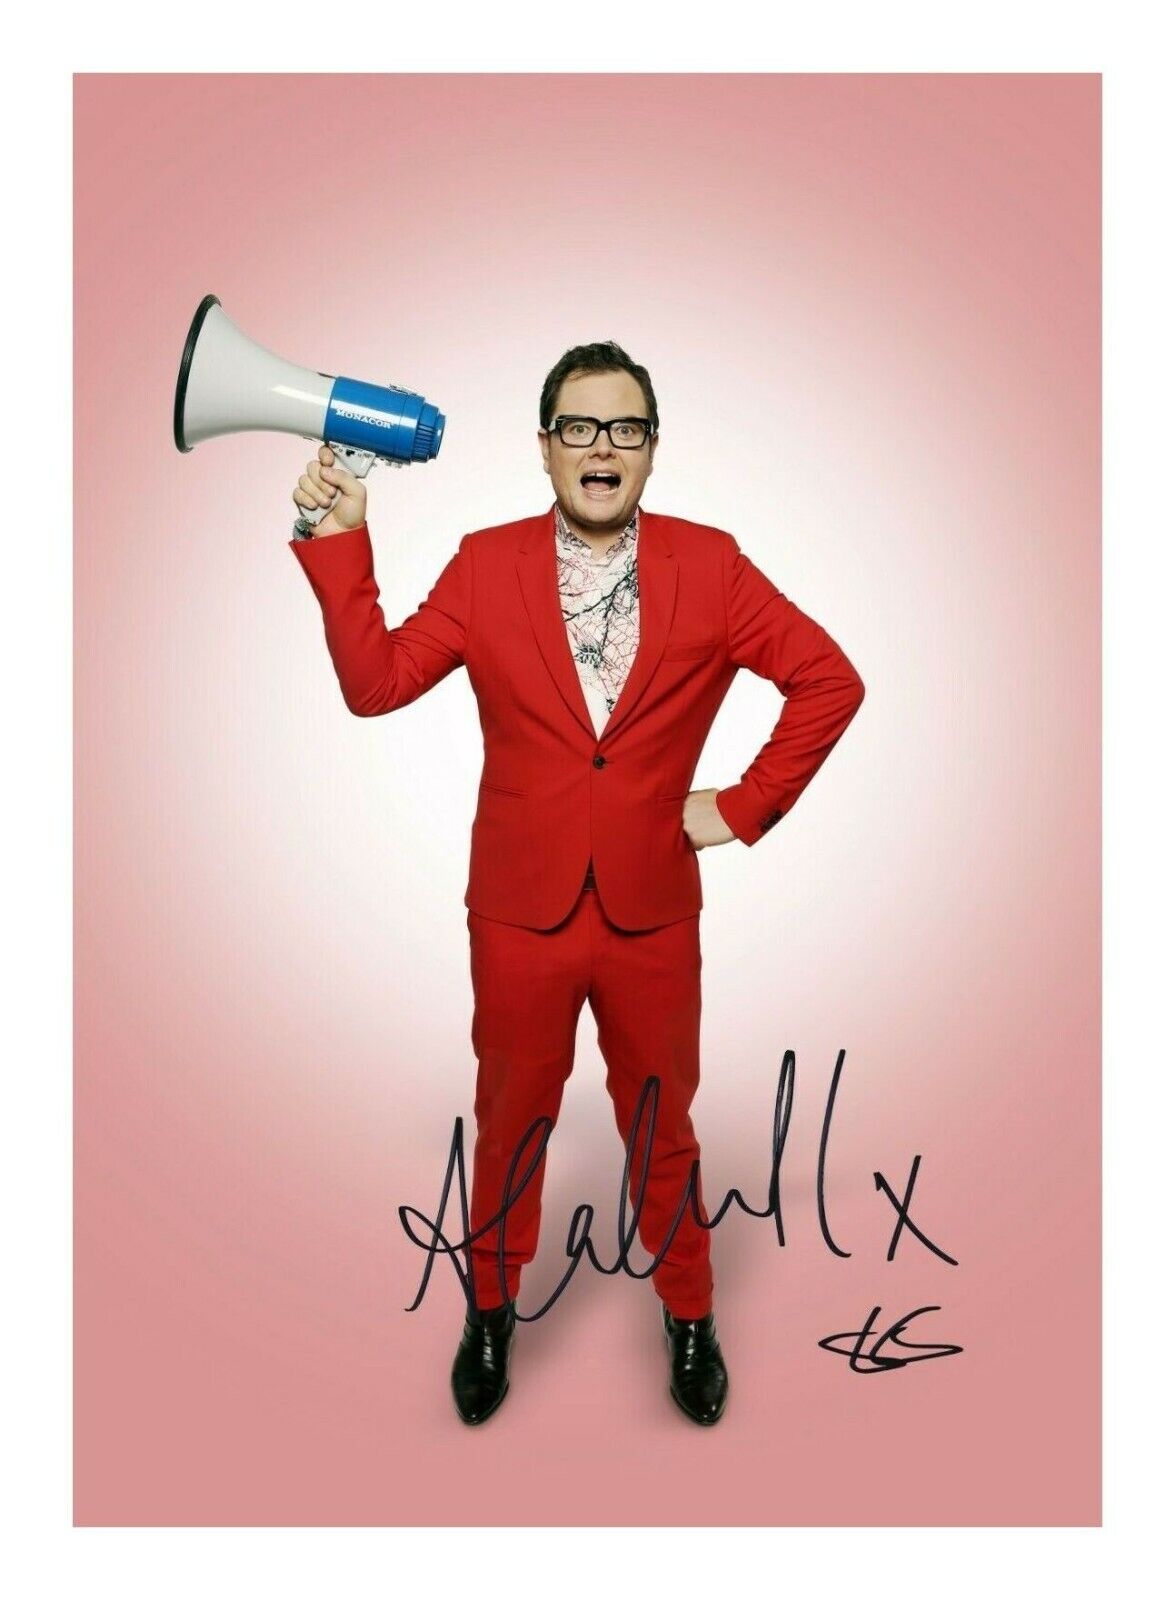 ALAN CARR AUTOGRAPH SIGNED PP Photo Poster painting POSTER